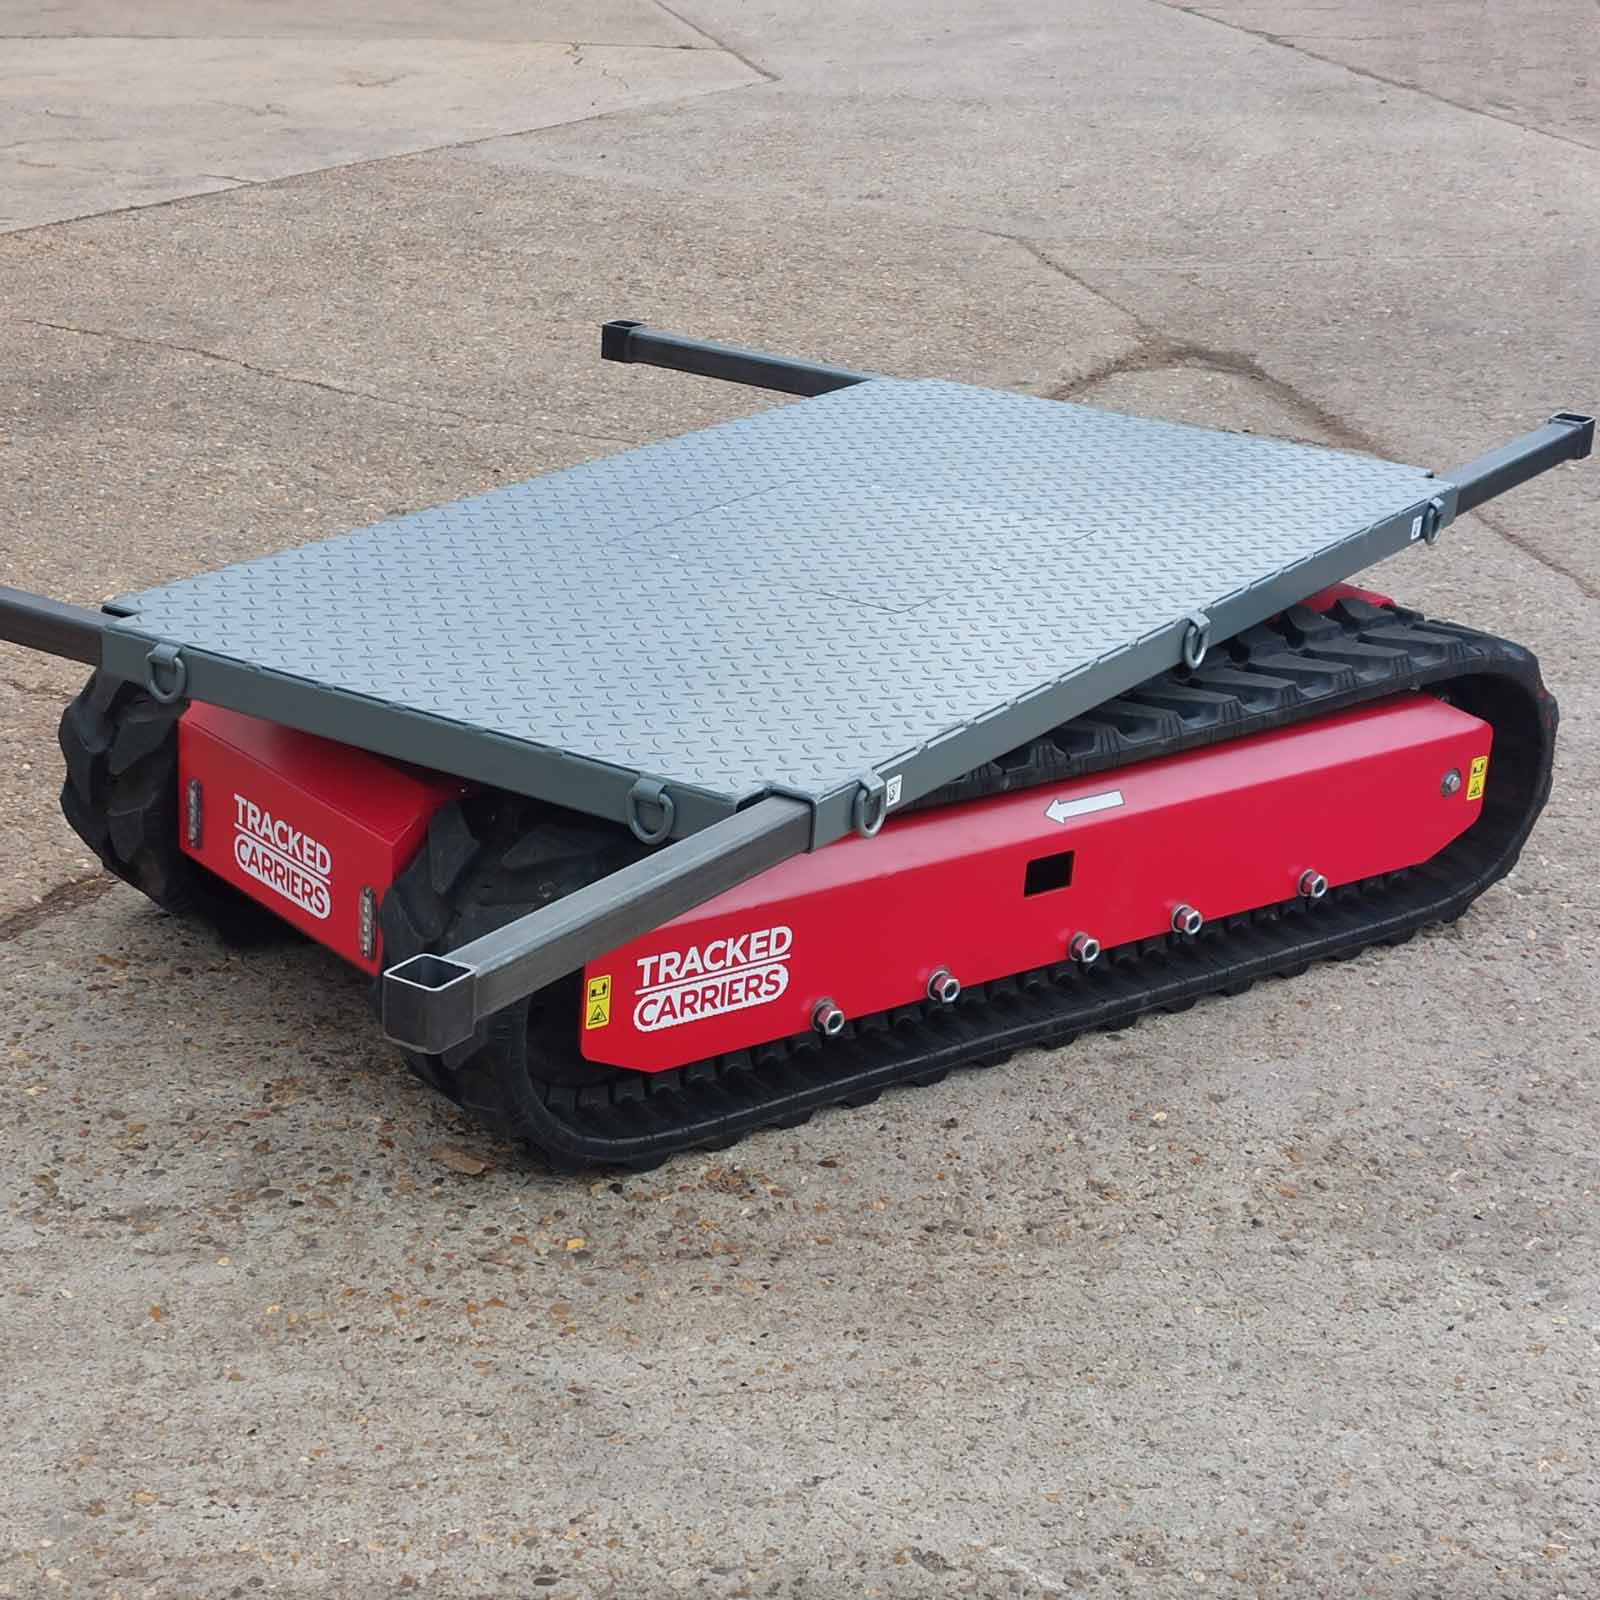 TC1 1200 Pro tracked carrier